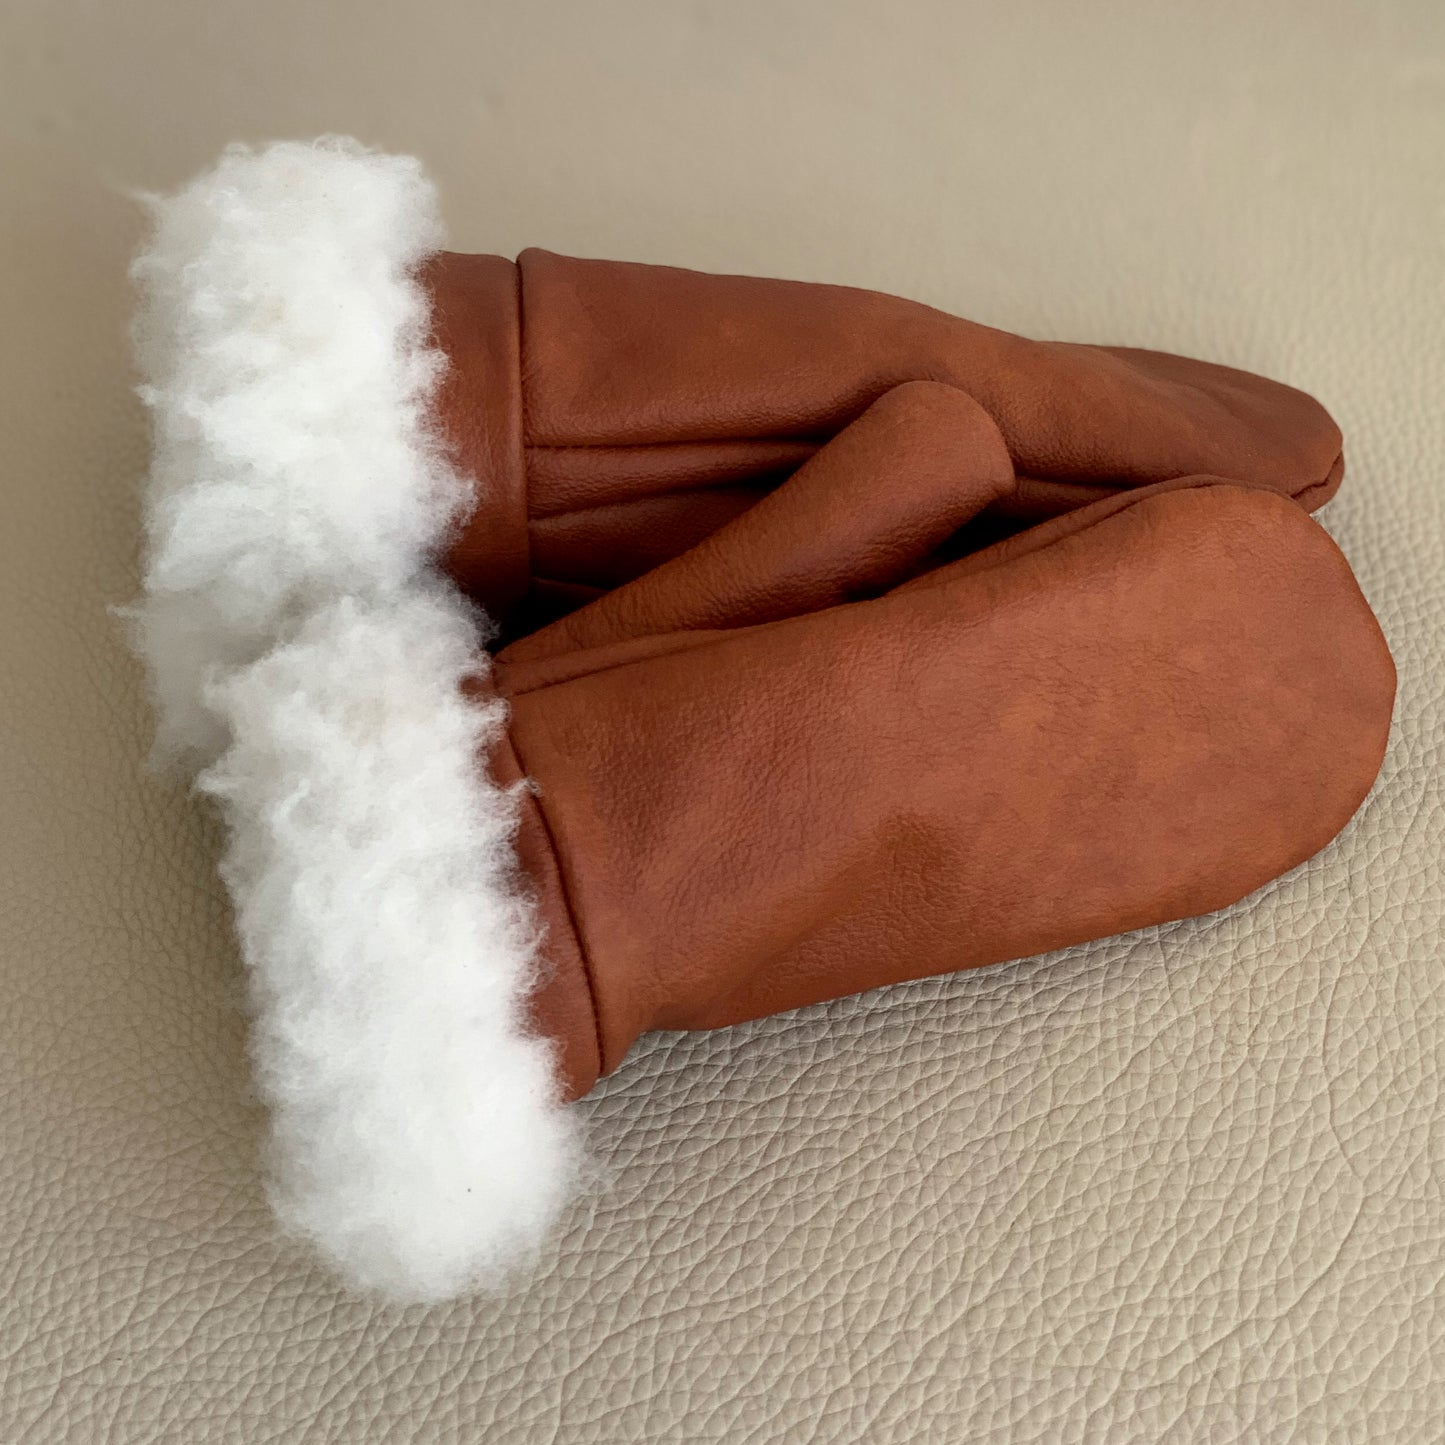 Padded leather gloves, size S-M (Color: COGNAC)